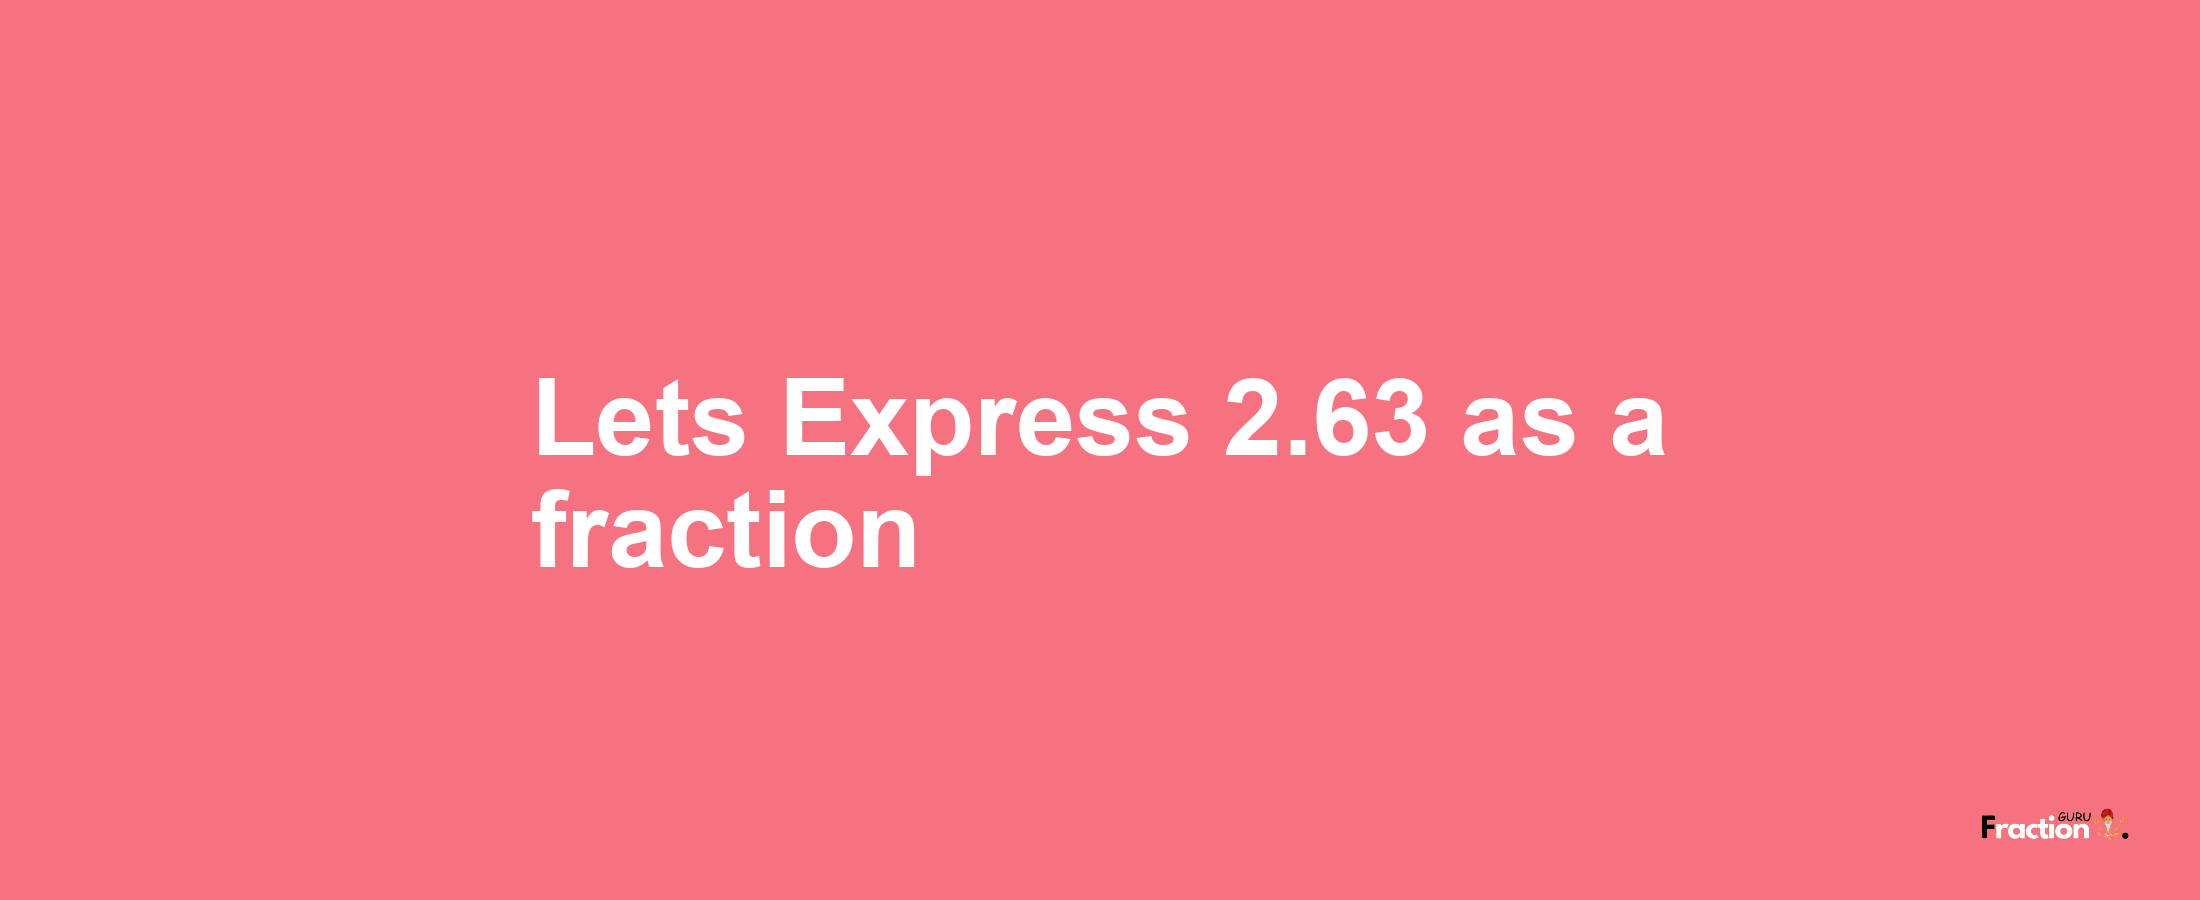 Lets Express 2.63 as afraction